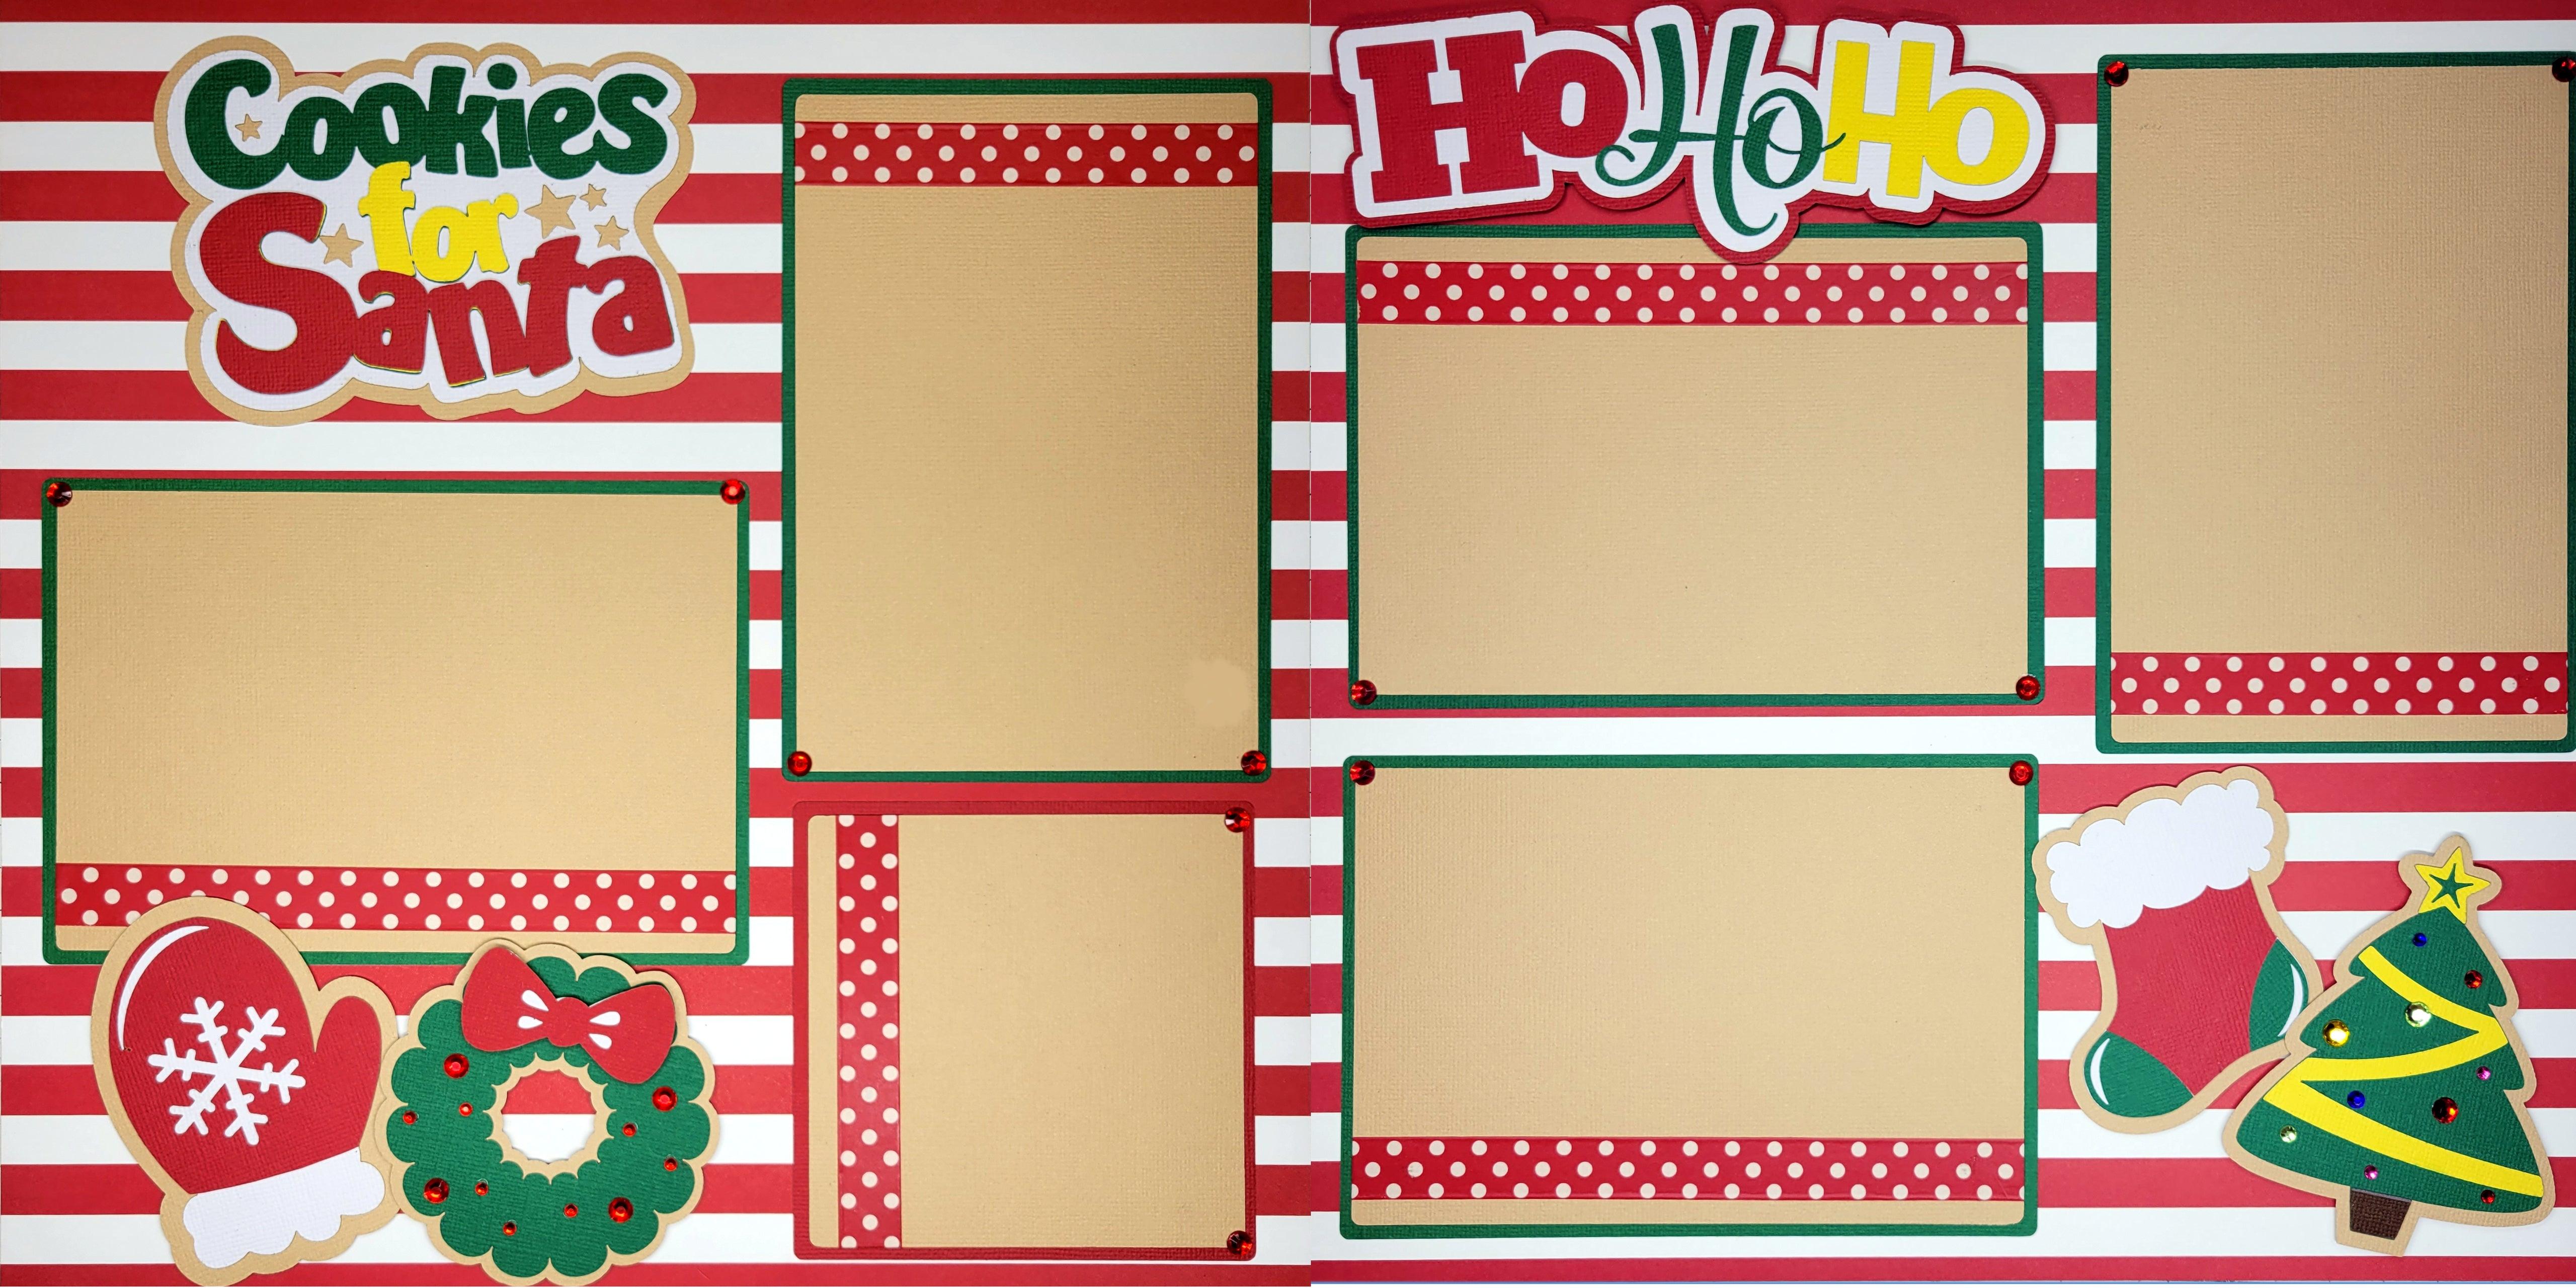 Cookies for Santa (2) - 12 x 12 Pages, Fully-Assembled & Hand-Crafted 3D Scrapbook Premade by SSC Designs